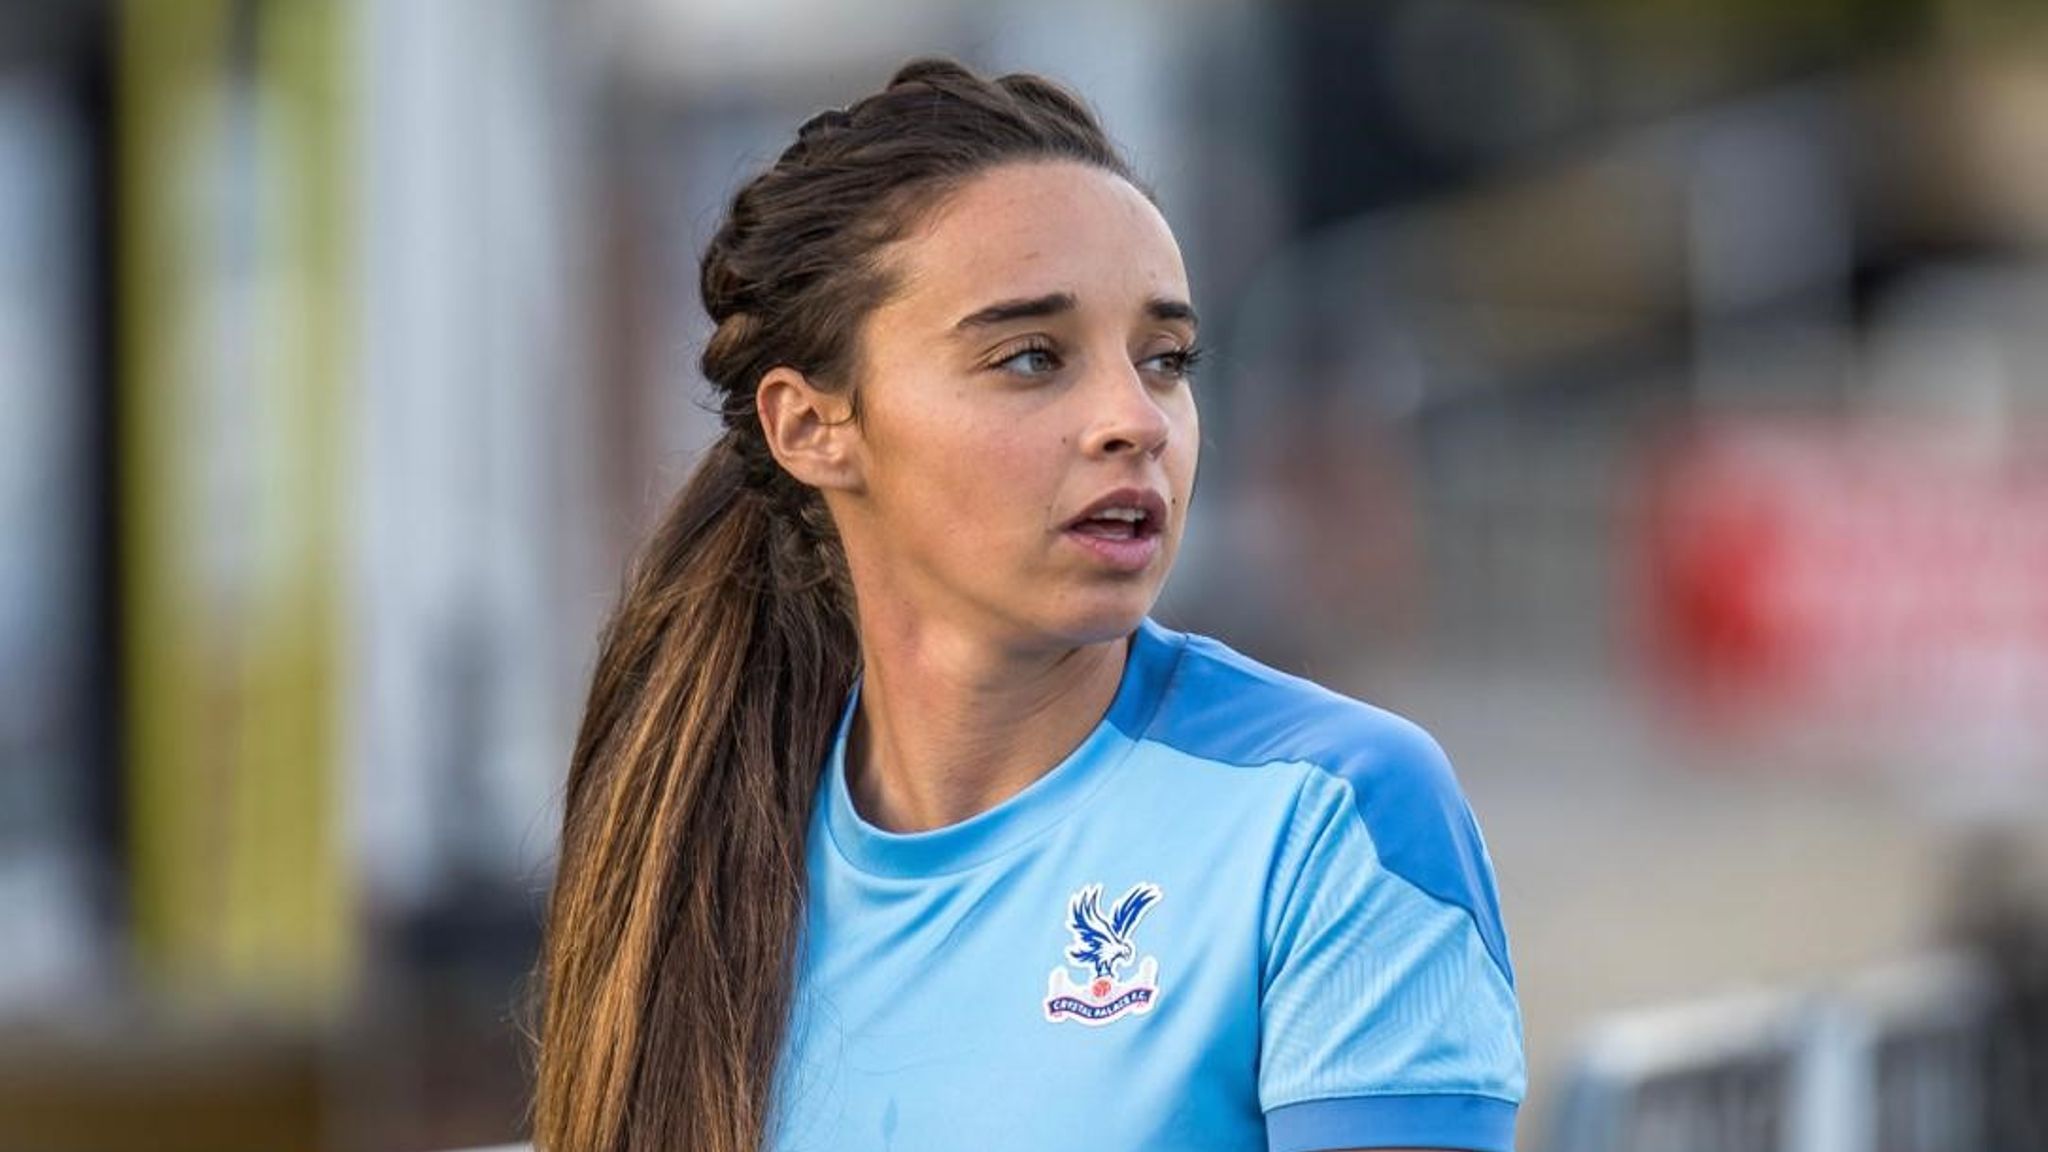 Crystal Palace's Leigh Nicol is taking back control after a phone hack...